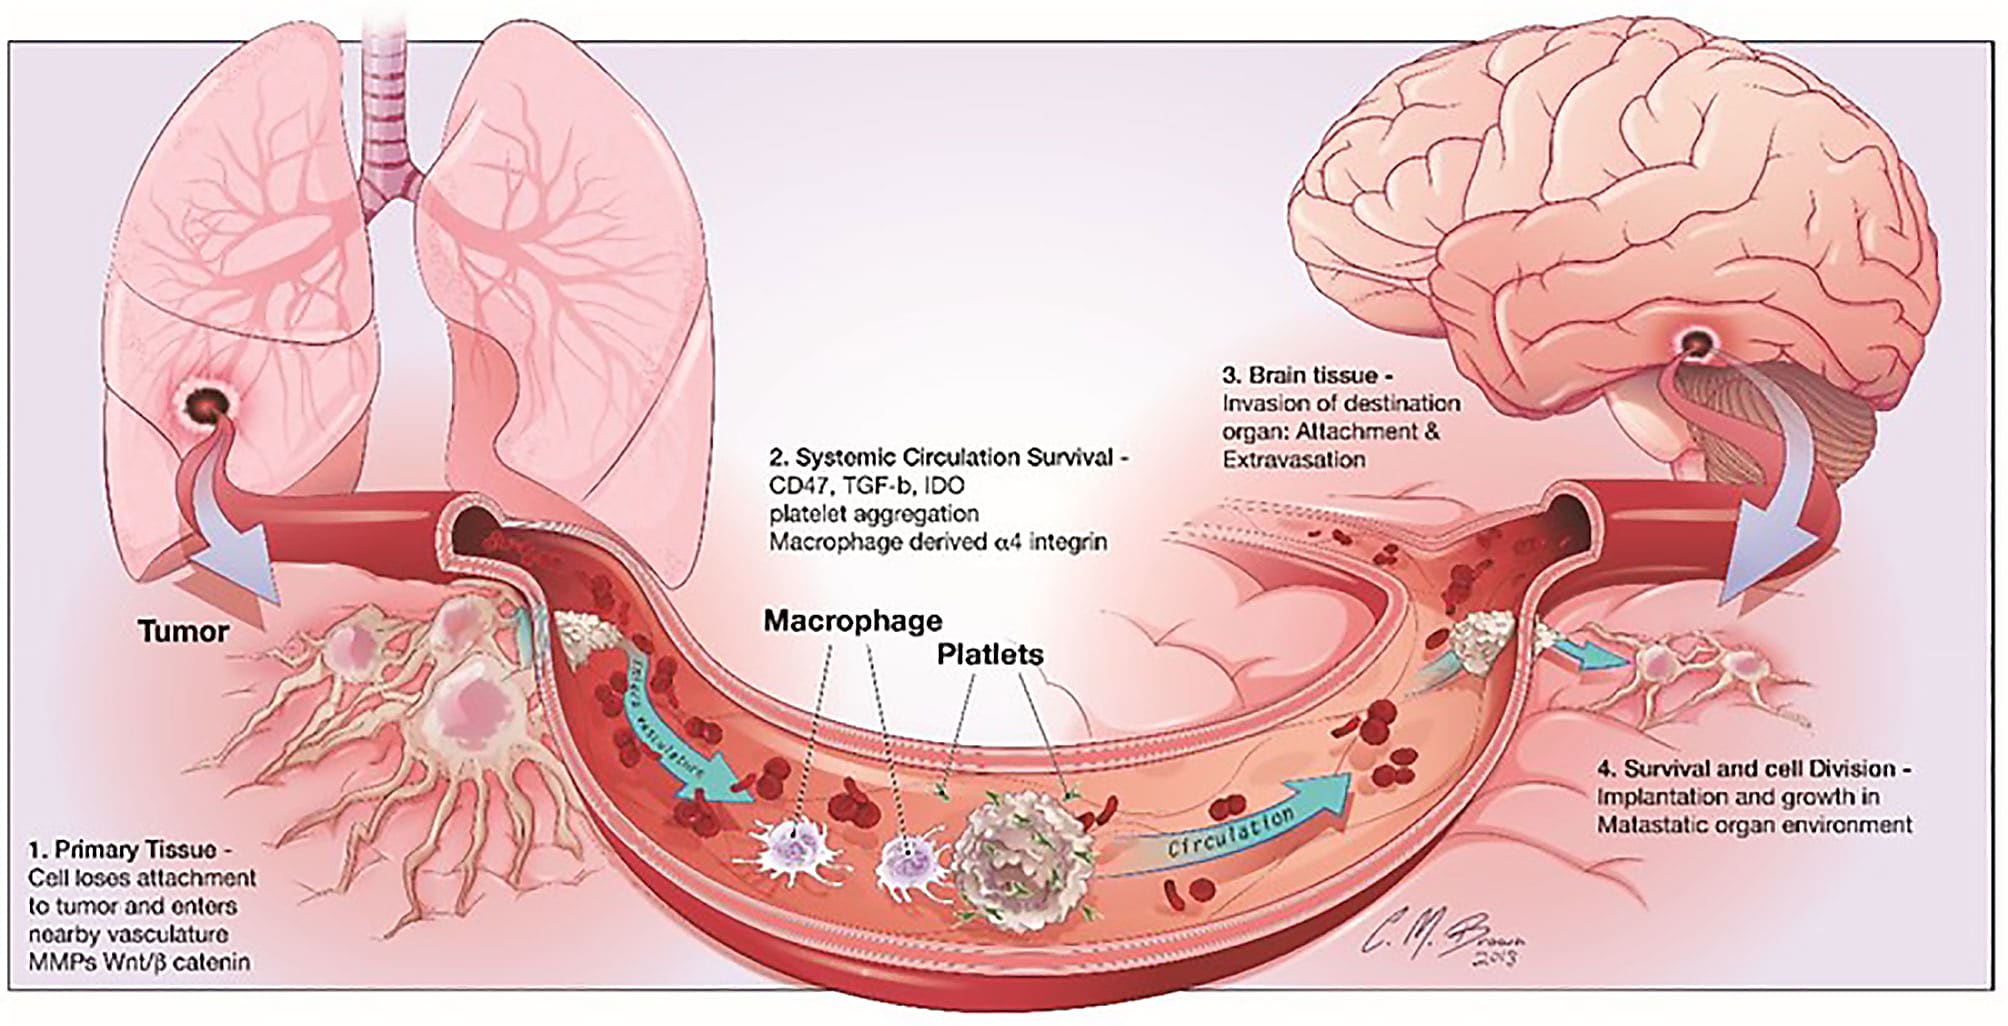 Steps involved in brain metastasis. Brain metastasis cascade involves four major steps: 1) Detachment of the metastatic cell from the primary cancer, 2) Survival in systemic circulation, 3) Invasion in the brain parenchyma, and 4) Survival in the CNS microenvironment. CREDIT: Luo L, et al. The immune microenvironment in brain metastases of non-small cell lung cancer. Front Oncol 11: 698844 (2021). (CC BY 4.0).